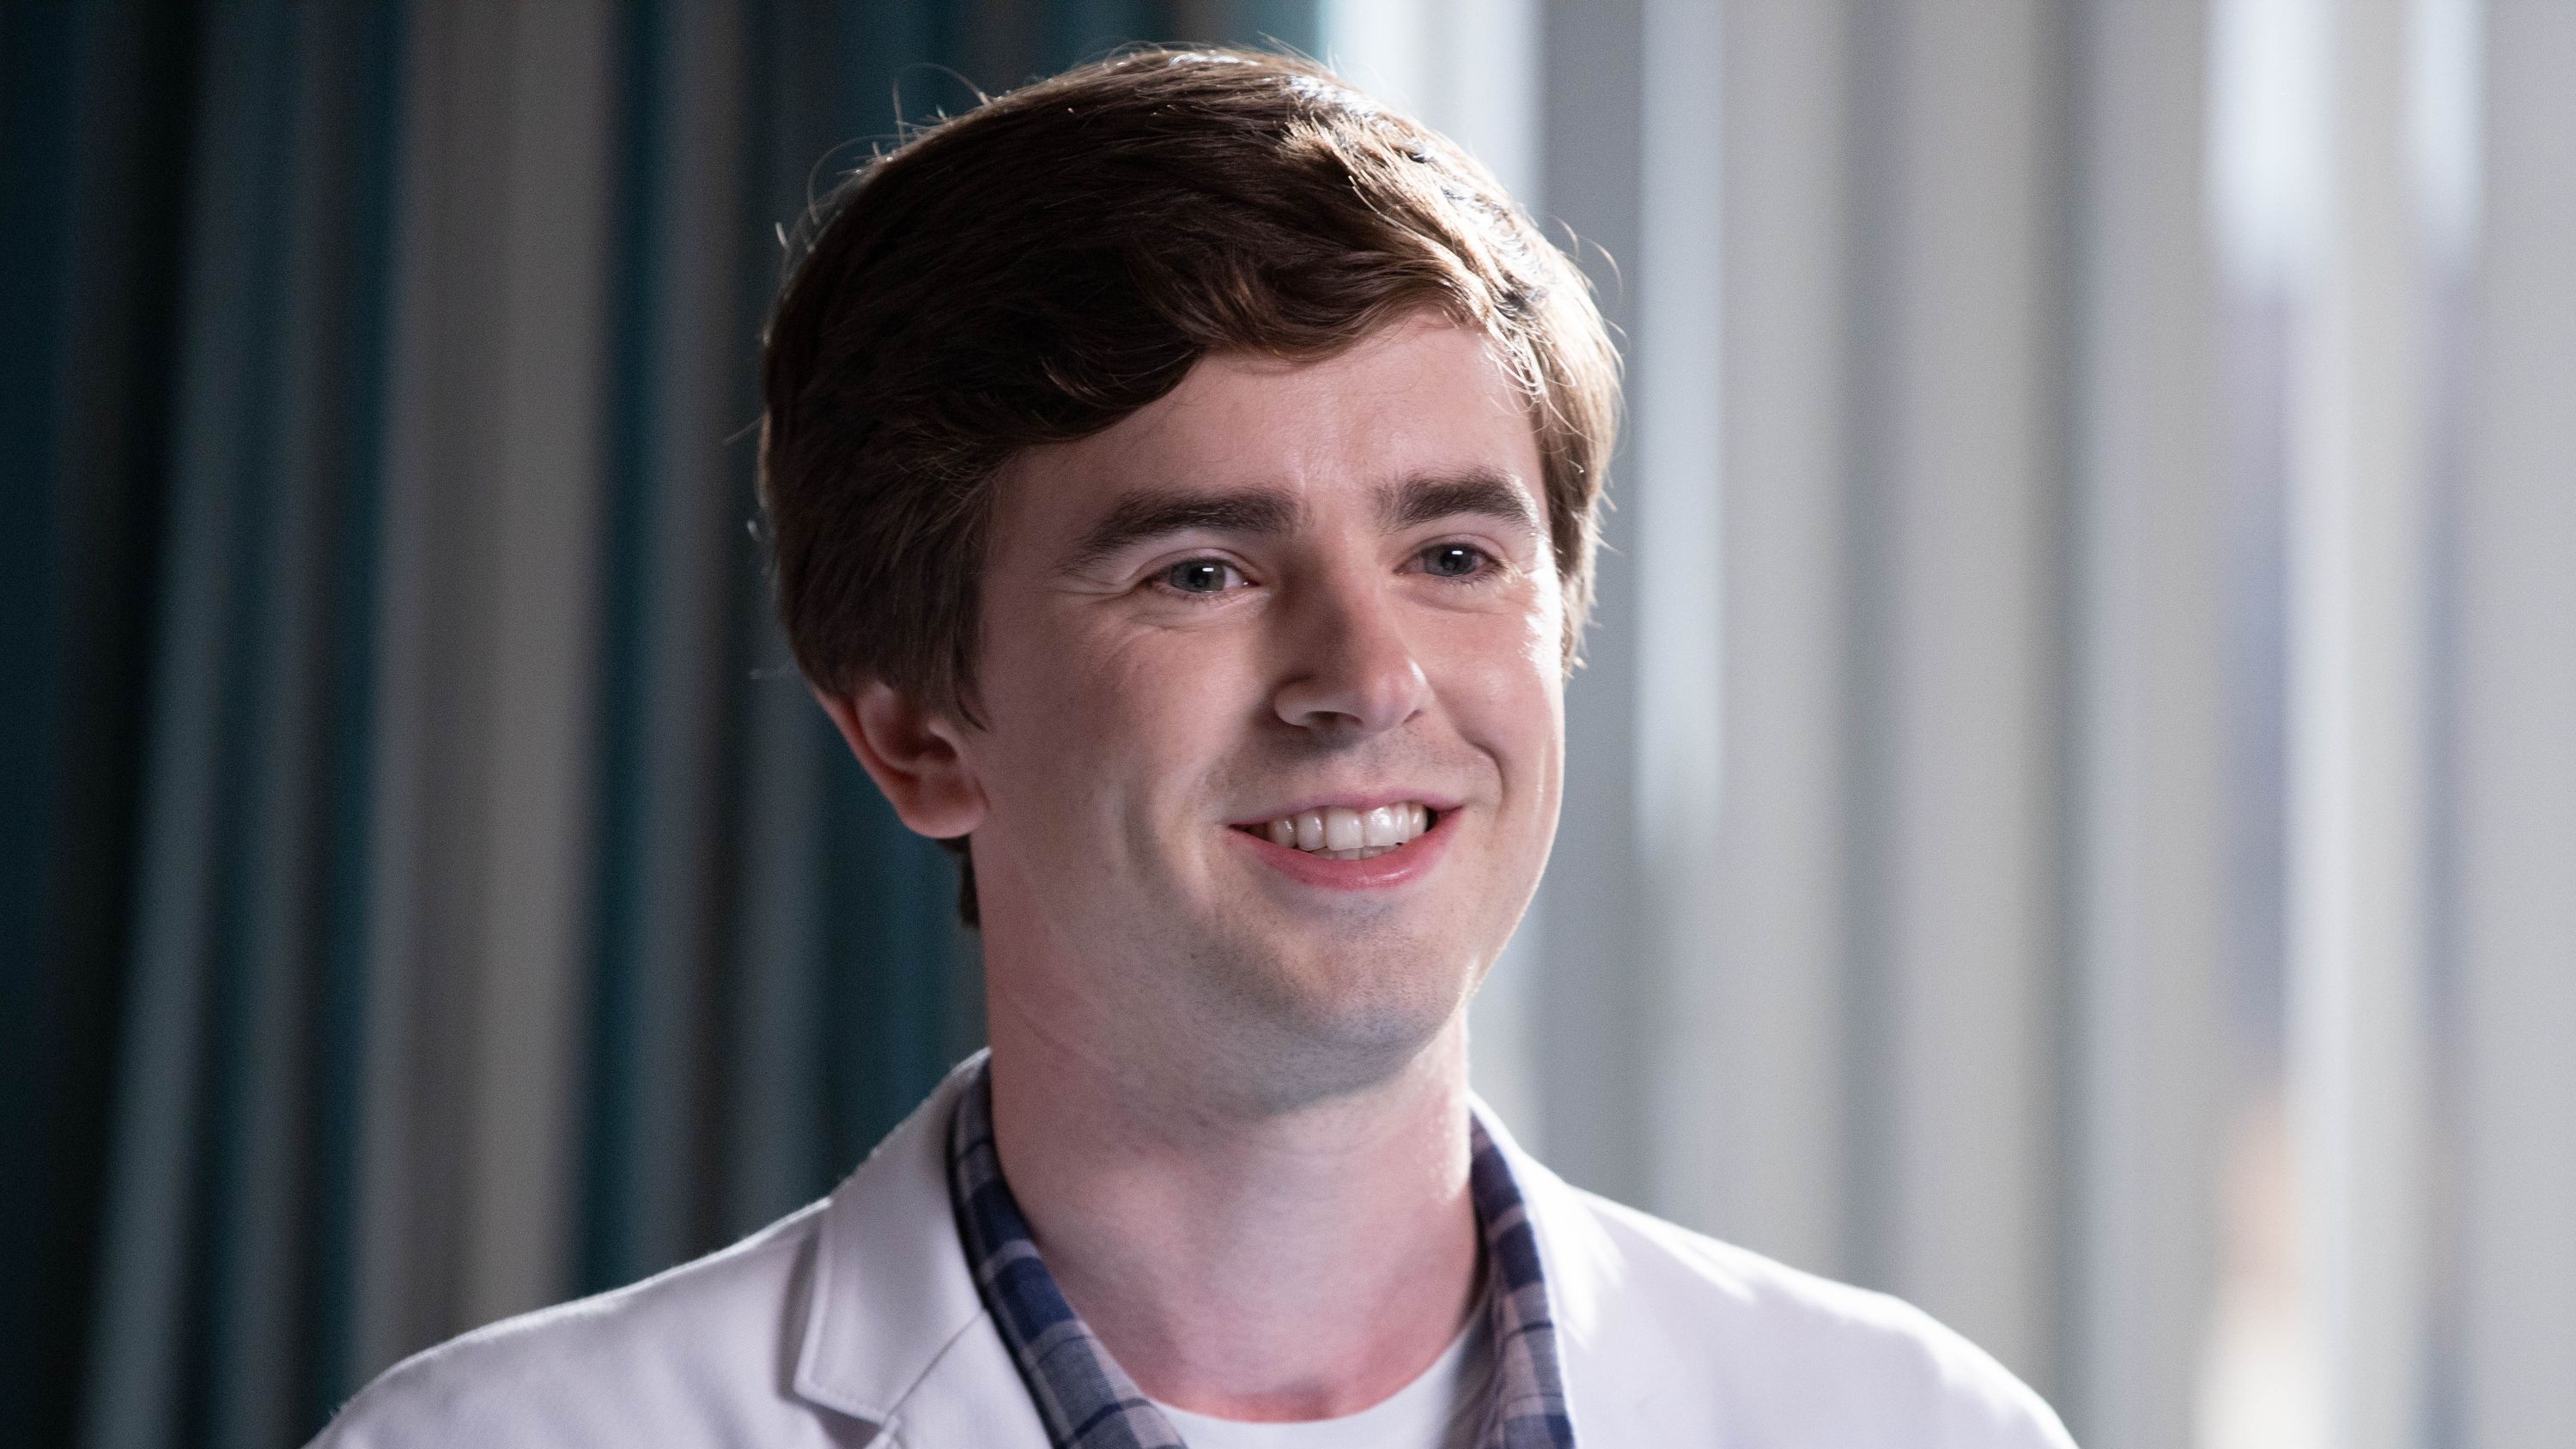 The Good Doctor' Star Freddie Highmore on Playing Someone With Autism